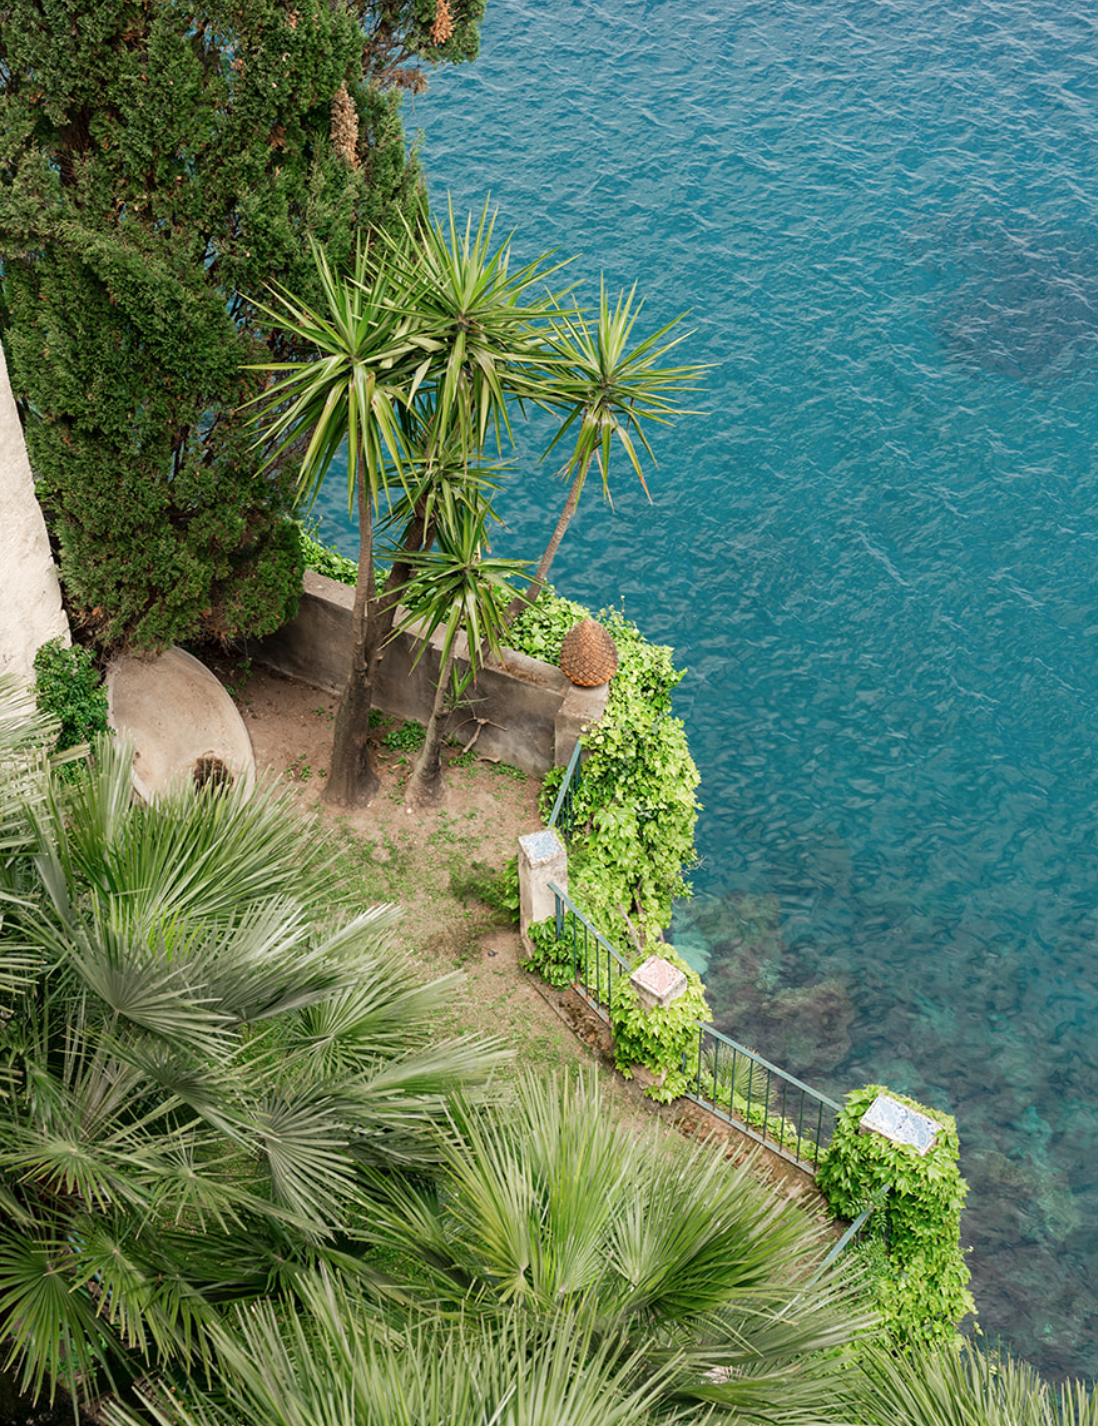 A cliff with lush greenery and palms with the ocean below it in Italy.